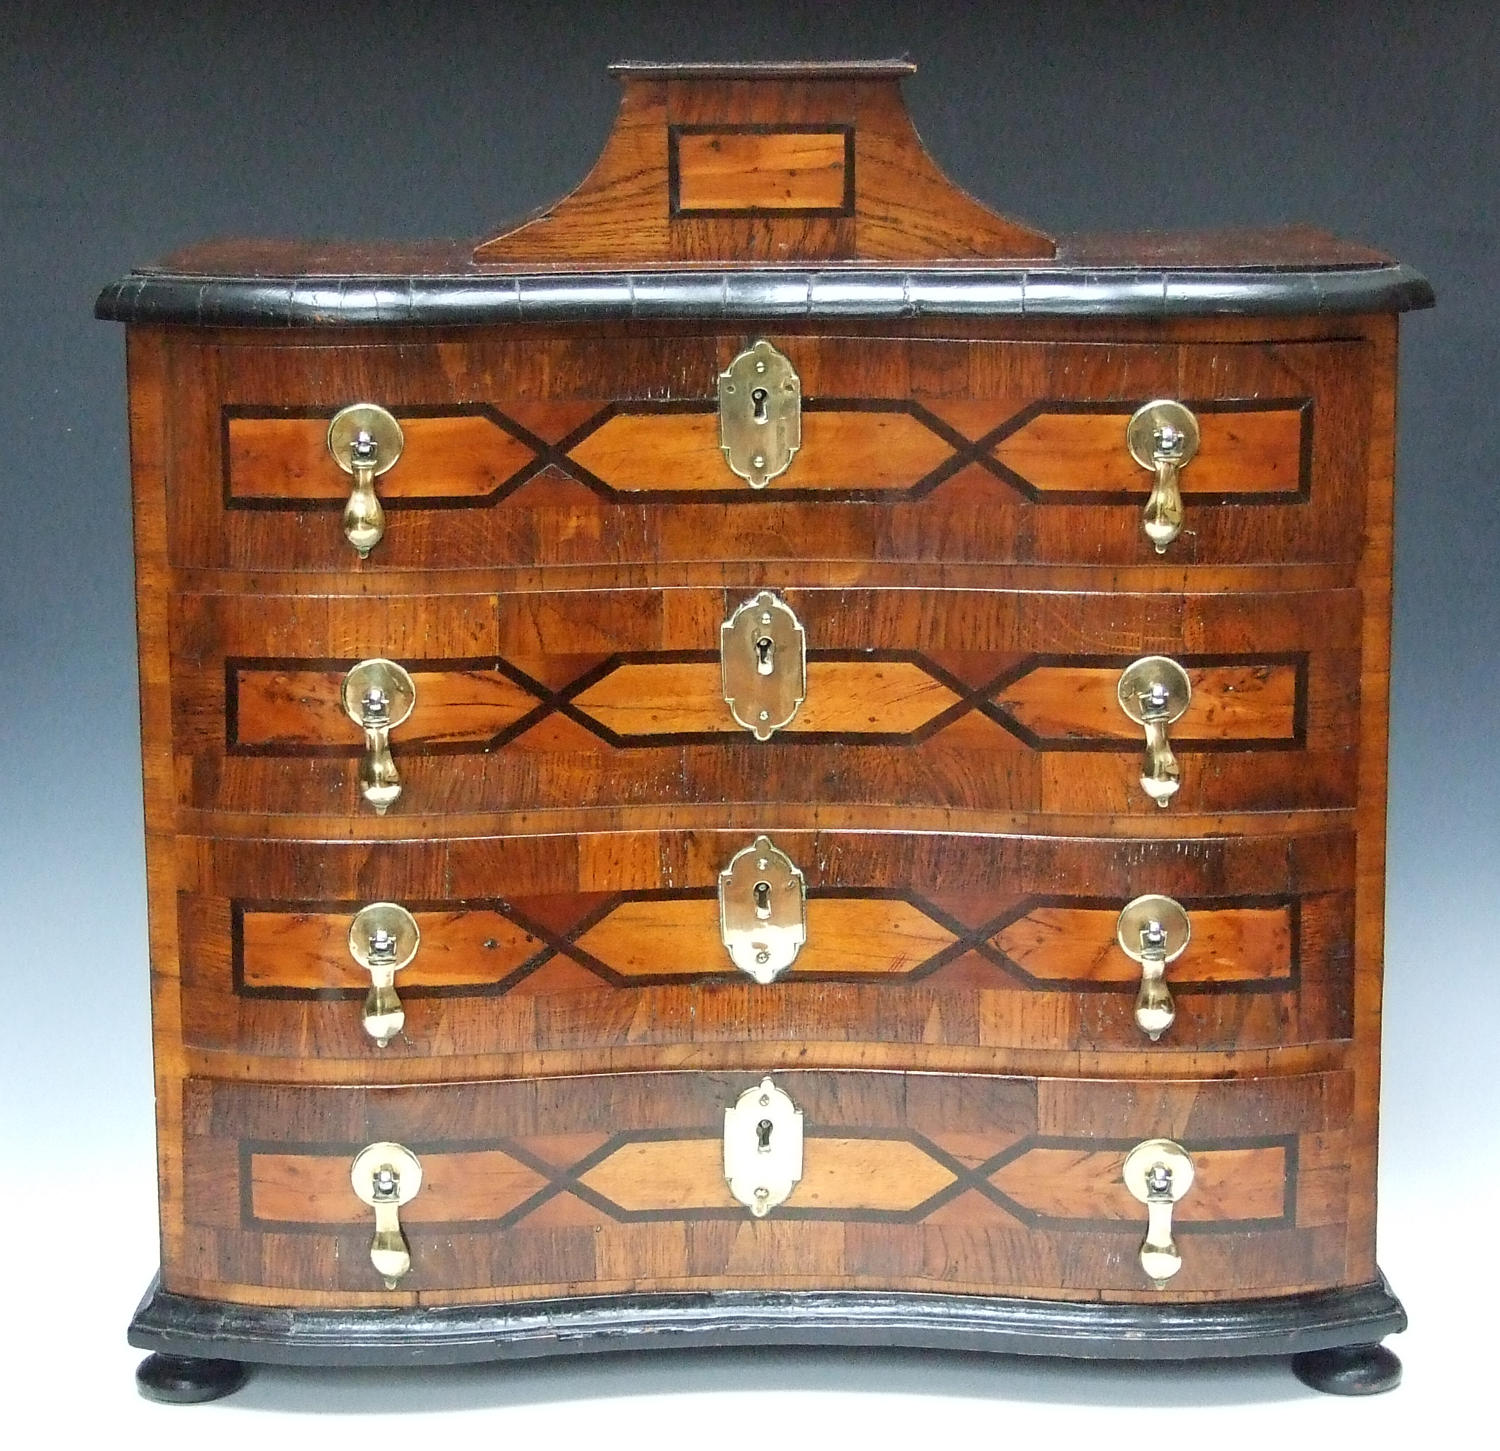 Unusual and attractive inlaid table cabinet